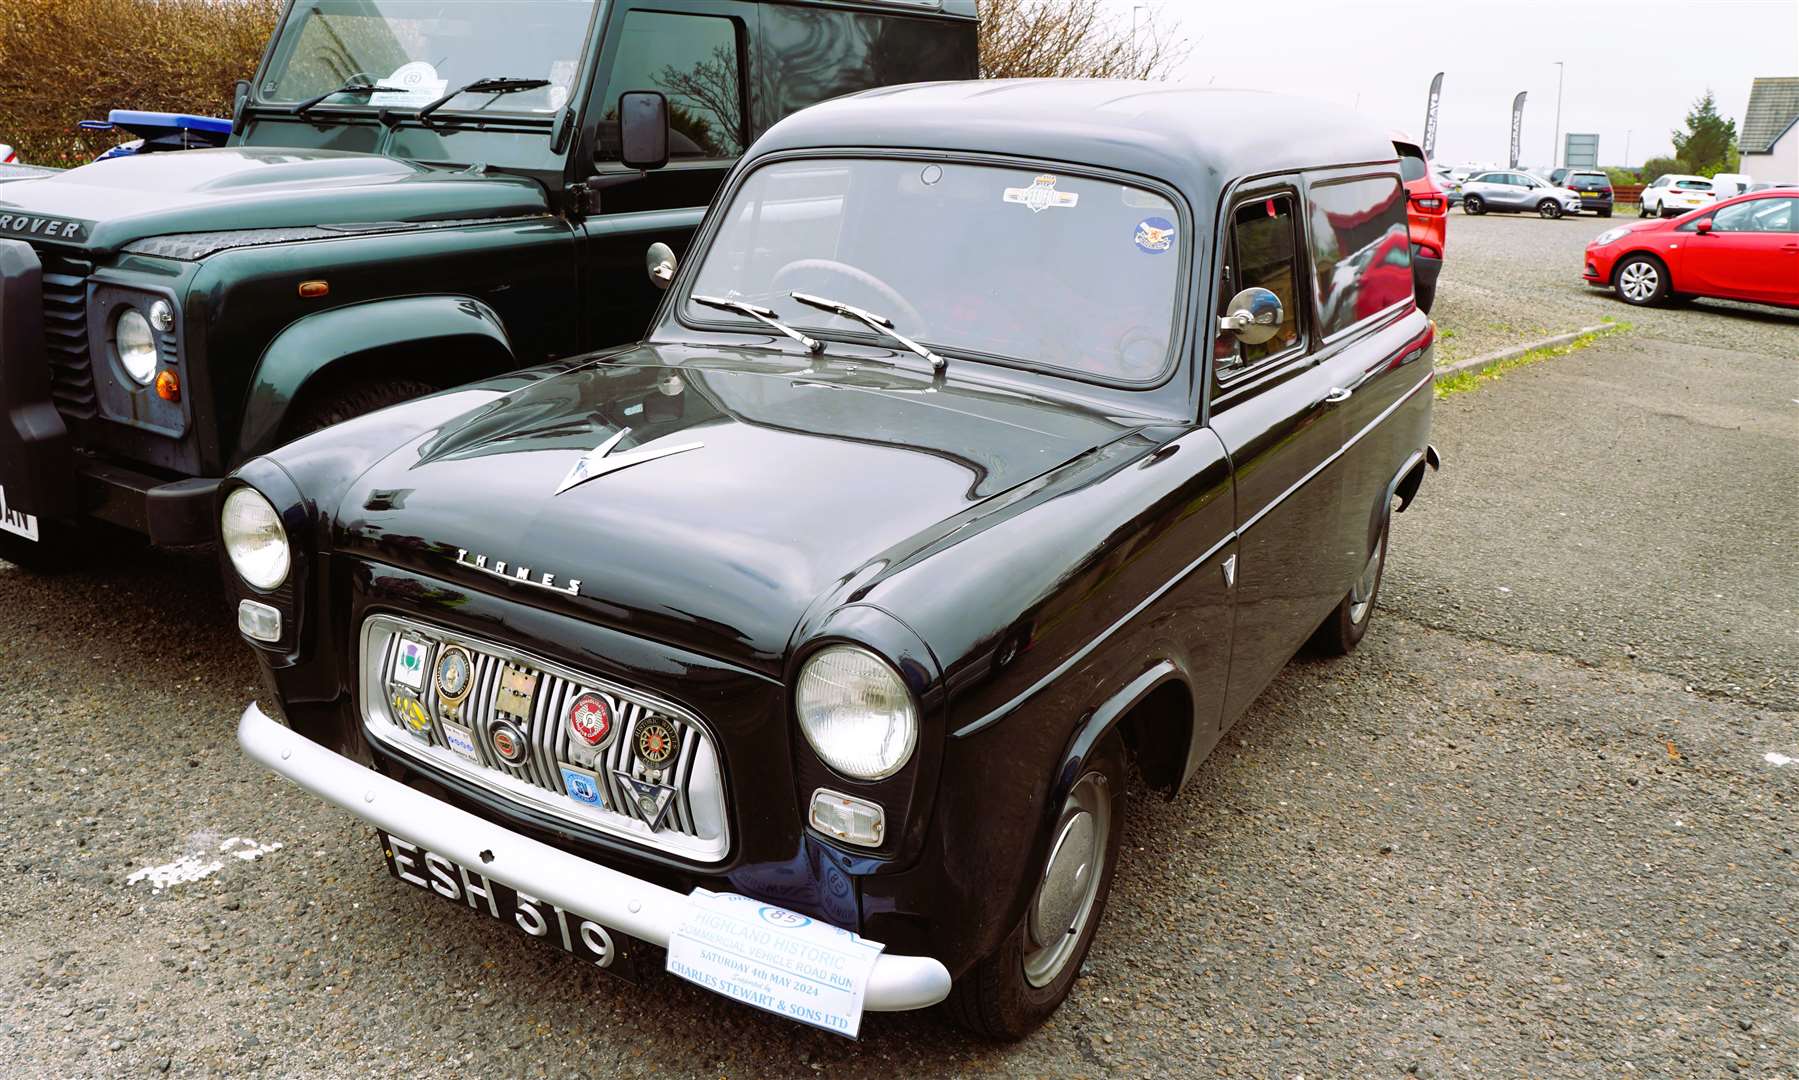 The Ford Thames is a car-derived van that was produced by Ford UK from 1954 to 1961. Picture: DGS